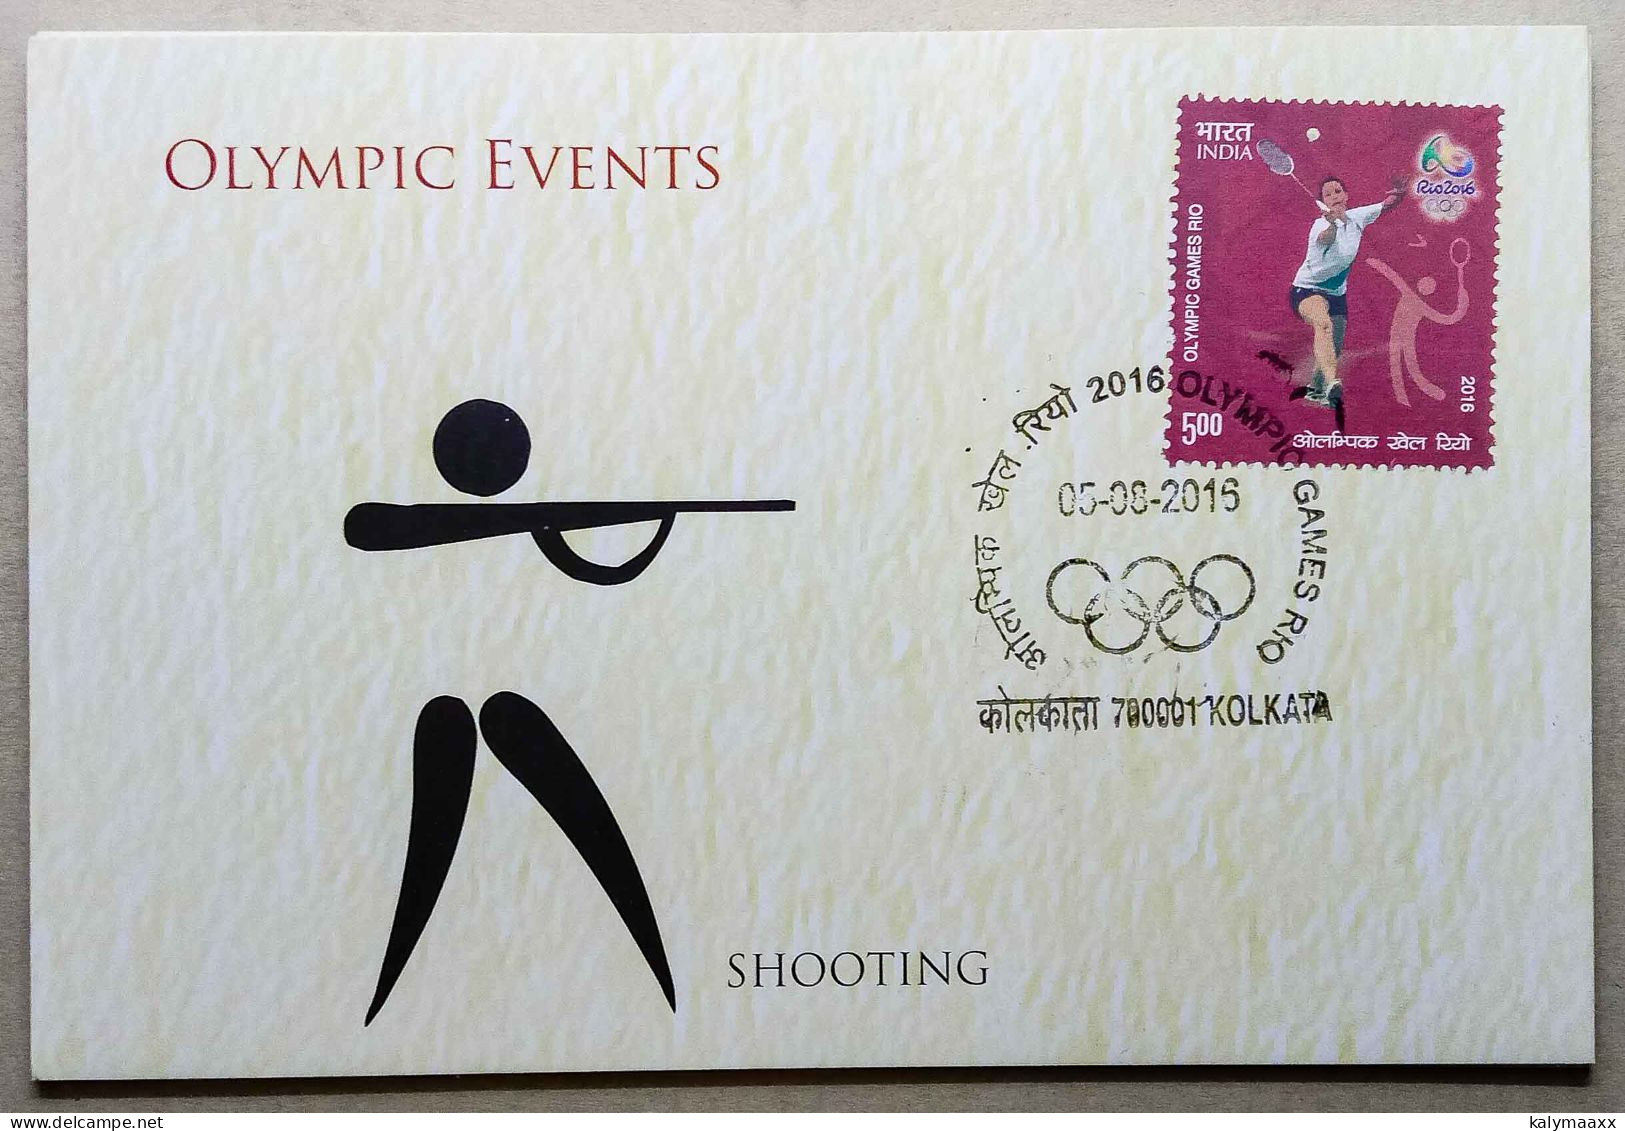 INDIA 2016 OLYMPIC EVENTS, SHOOTING, INDIA POST ISSUED POSTCARD...RARE - Tir (Armes)